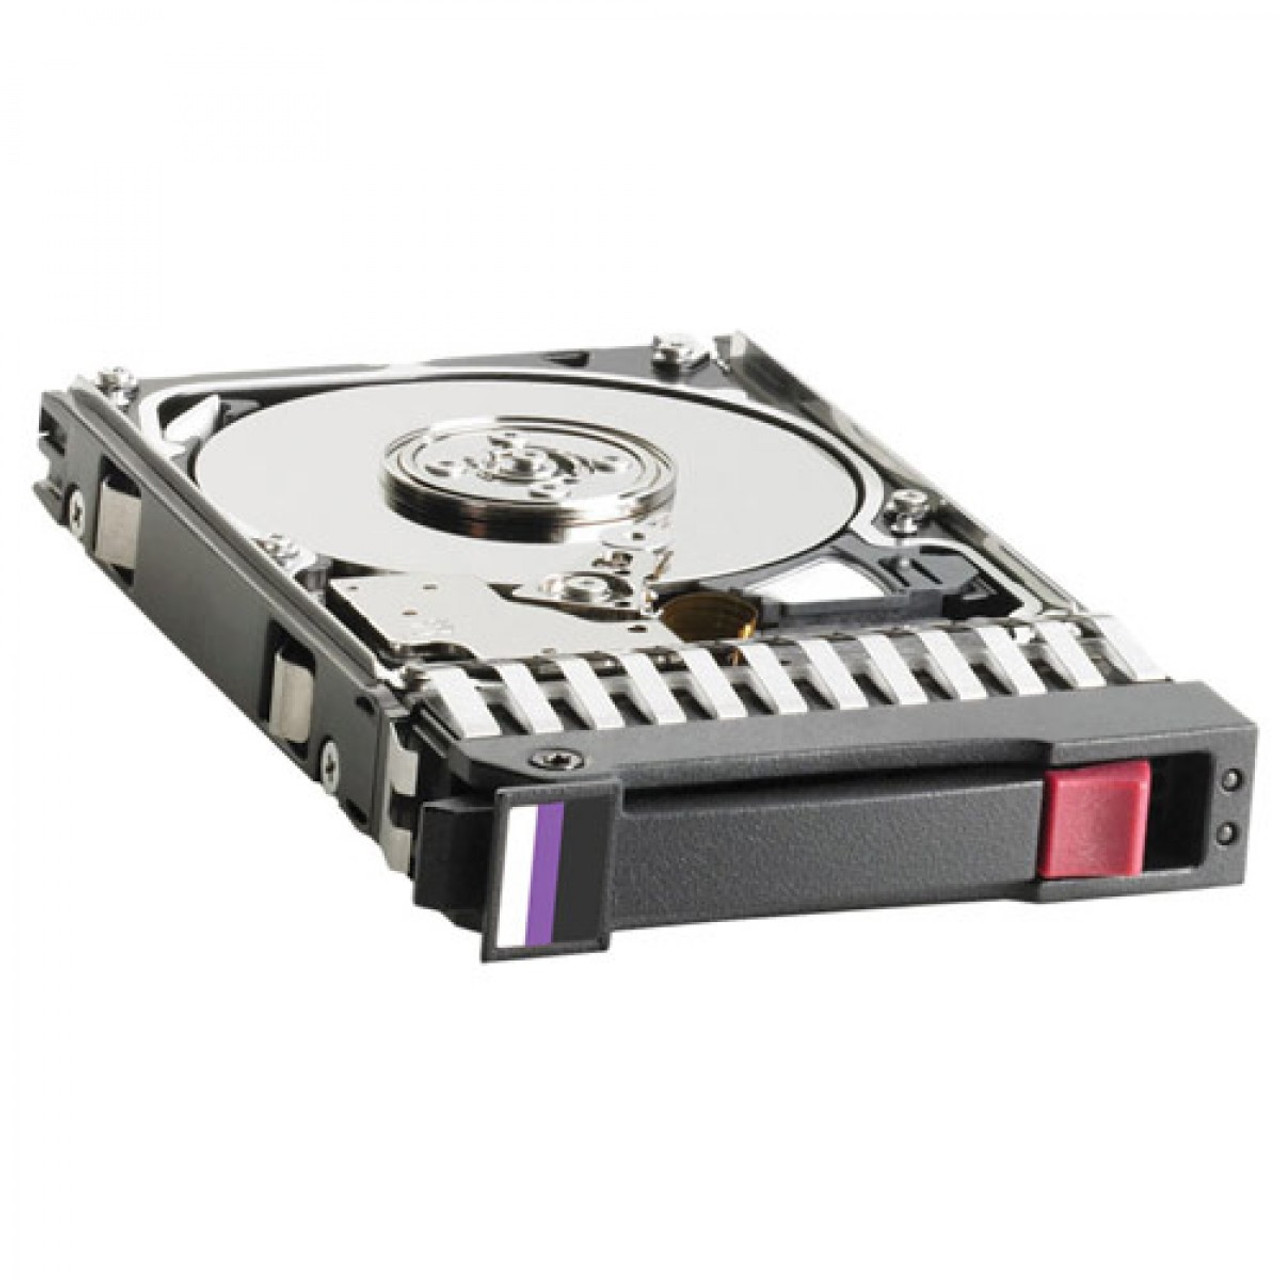 400-16111 - Dell 1TB 7200RPM SAS 3GB/s 3.5-inch Hot-pluggable Hard Drive with Tray